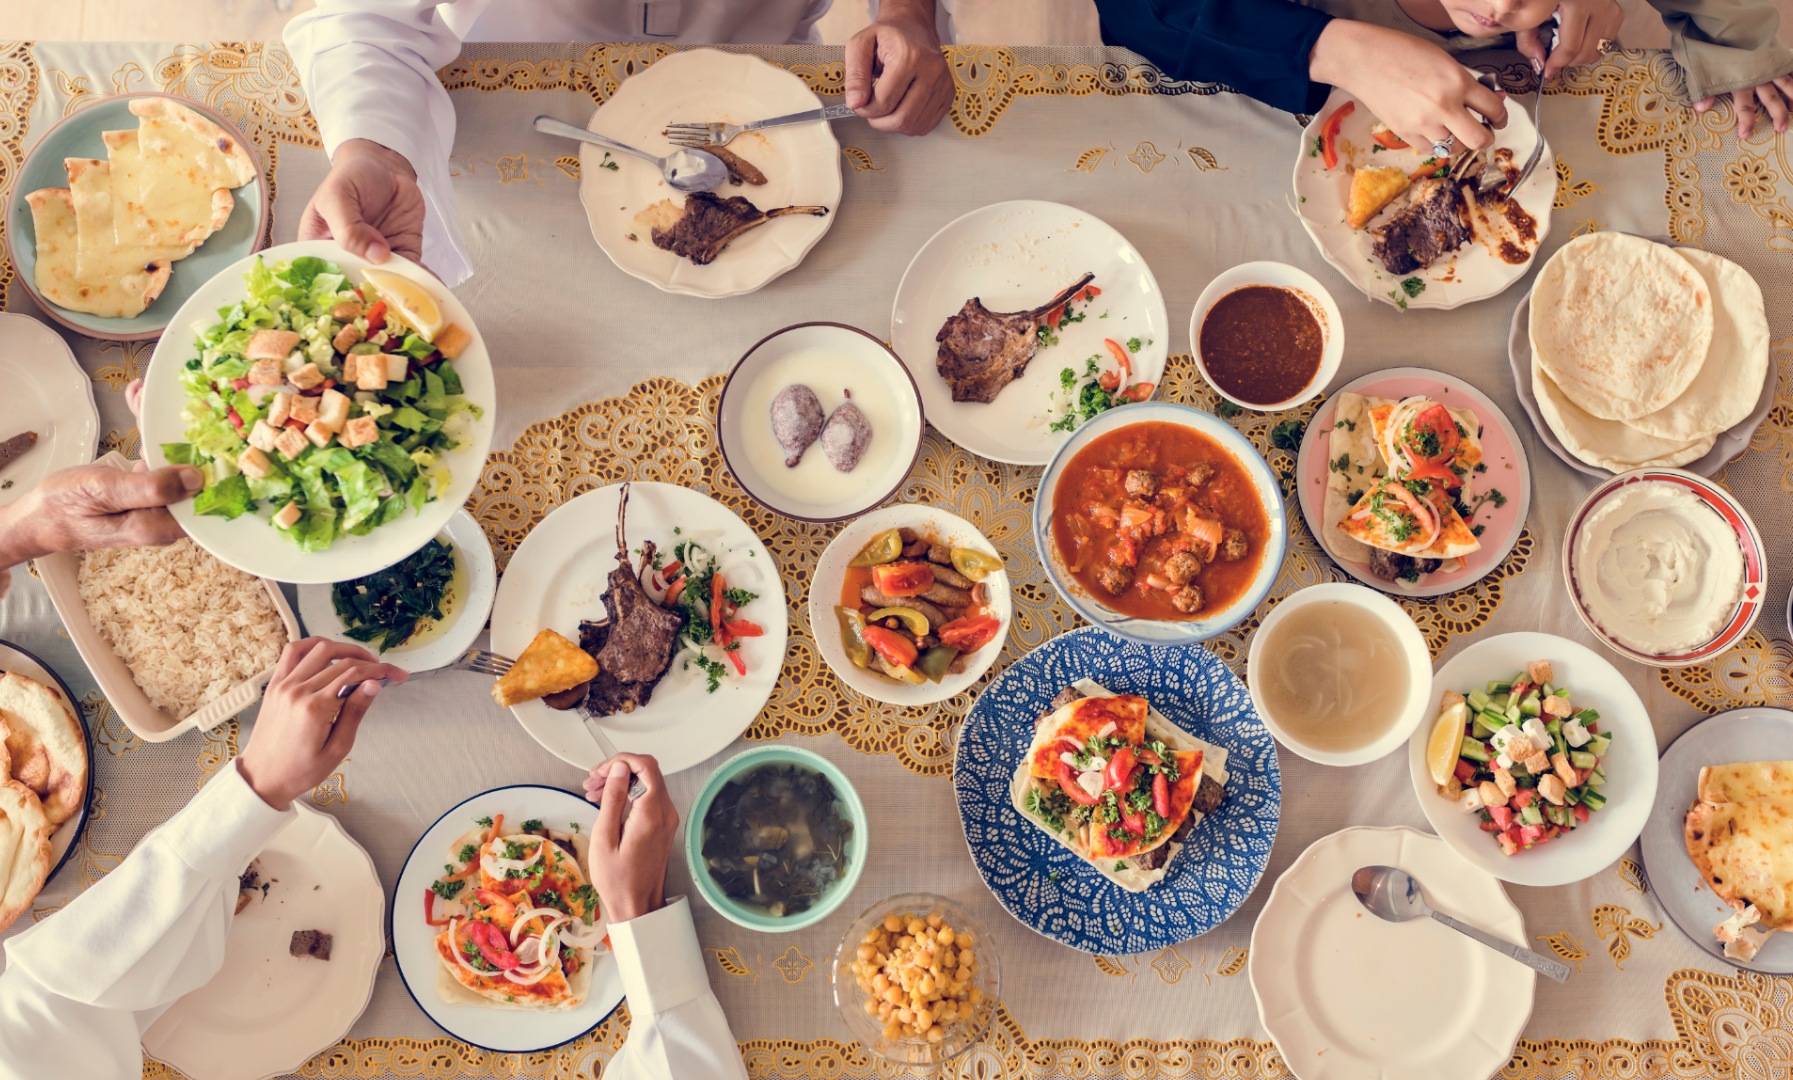 Restaurants to order Iftar Meals in Palo Alto | Quicklly